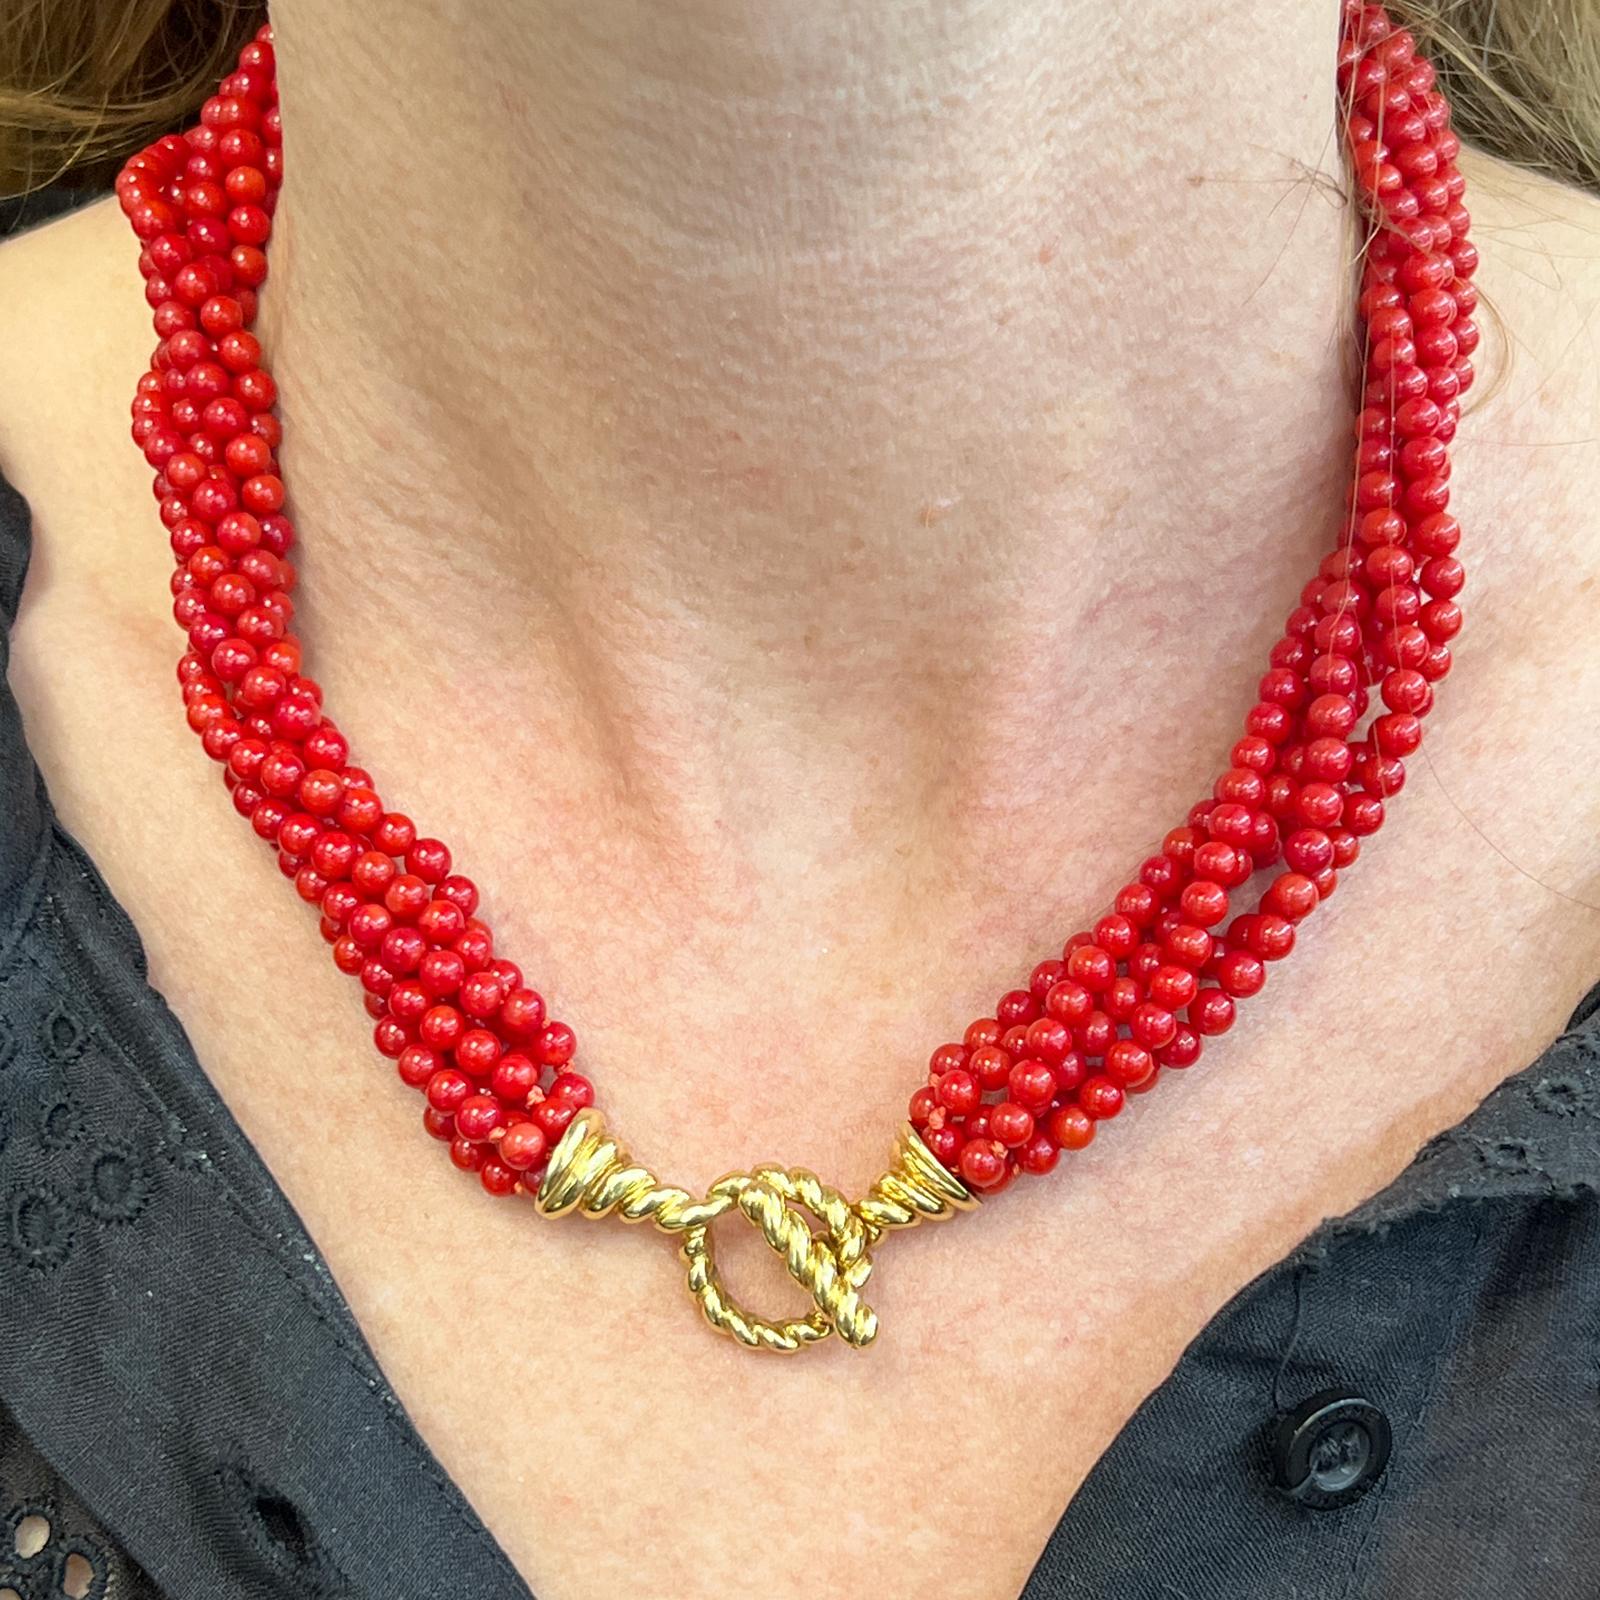 Stunning rare red coral multistrand necklace by Tiffany & Co. The necklace features 6 strands of matching  bright coral beads measuring 17 inches in length. The toggle clasp is fashioned in 18 karat yellow gold and signed Tiffany & Co. 18K. 